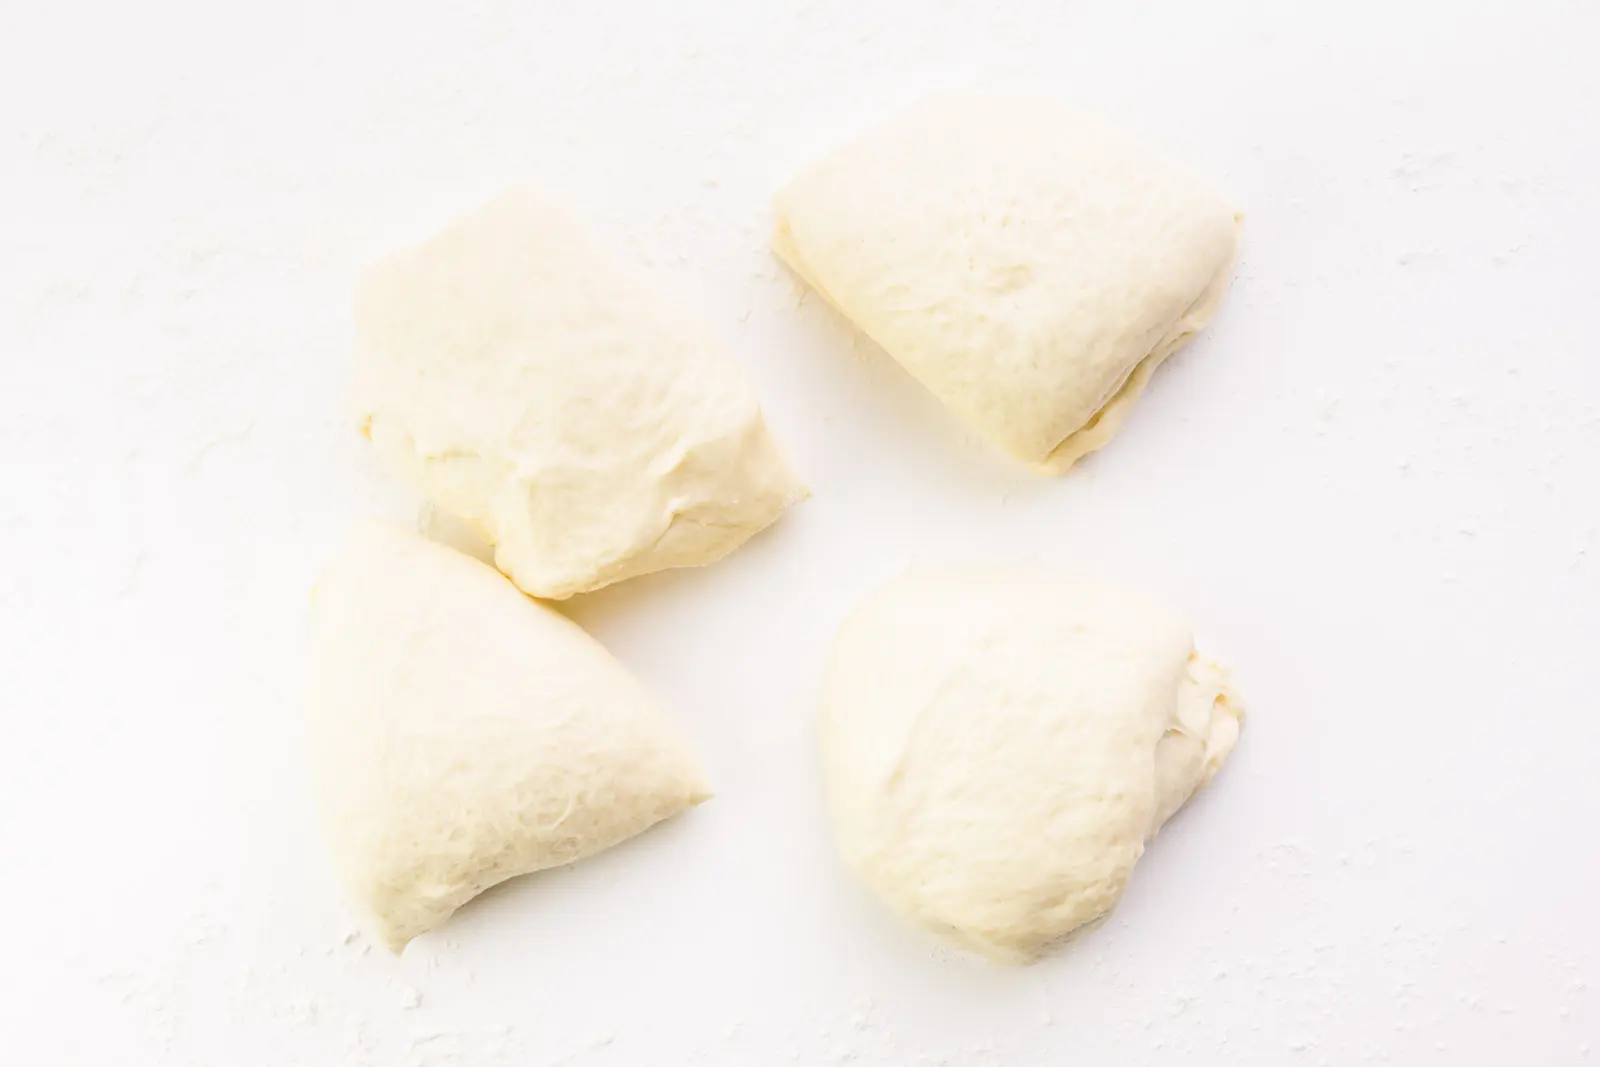 Dough has been cut into four equally-size pieces. These pieces are on a white counter.